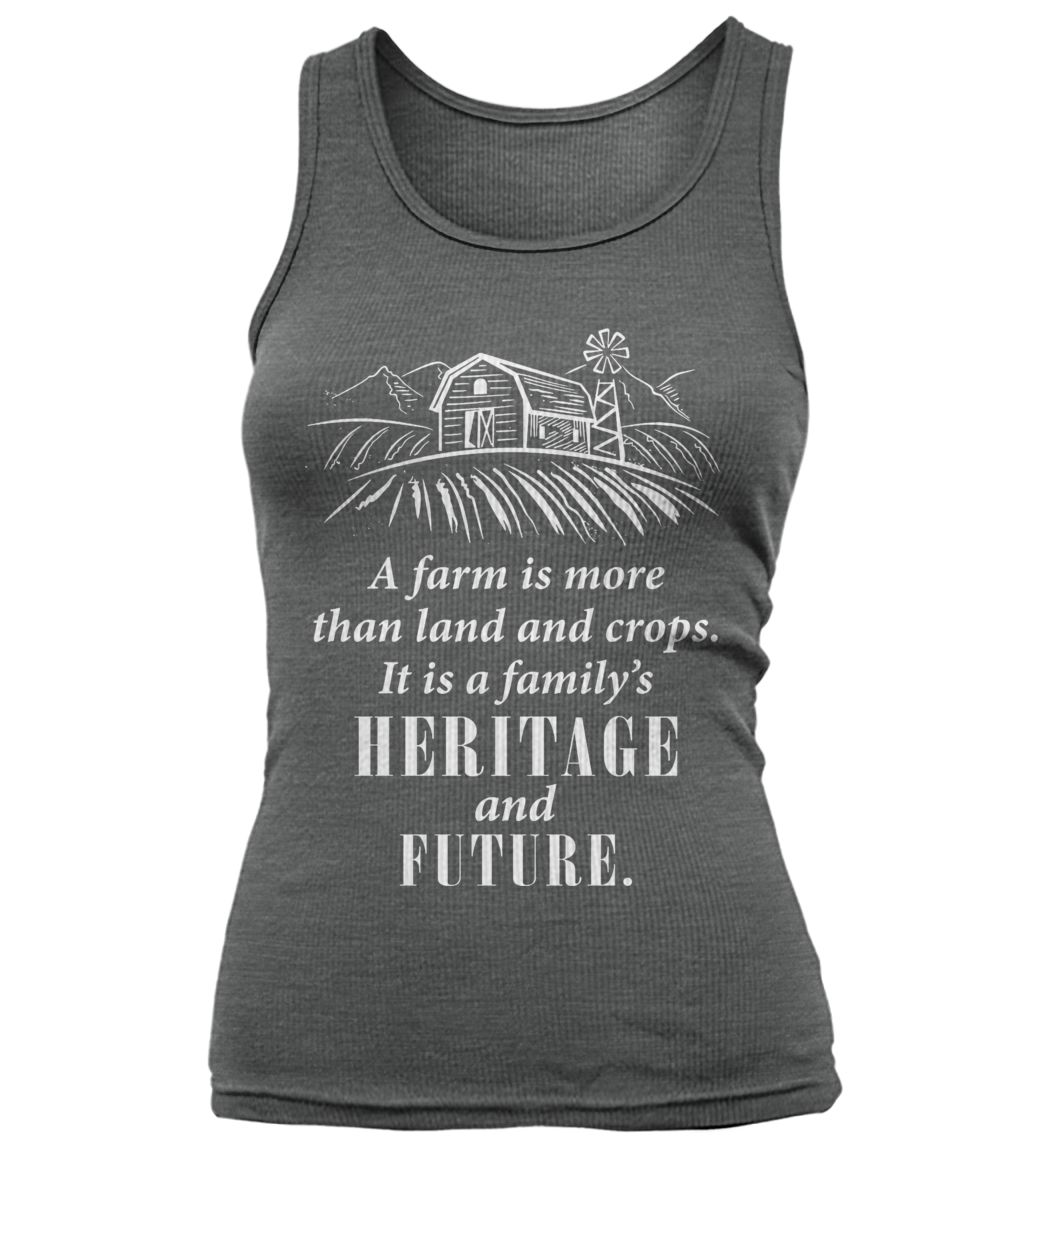 A farm is more than land and crops it is a family's heritage and future women's tank top